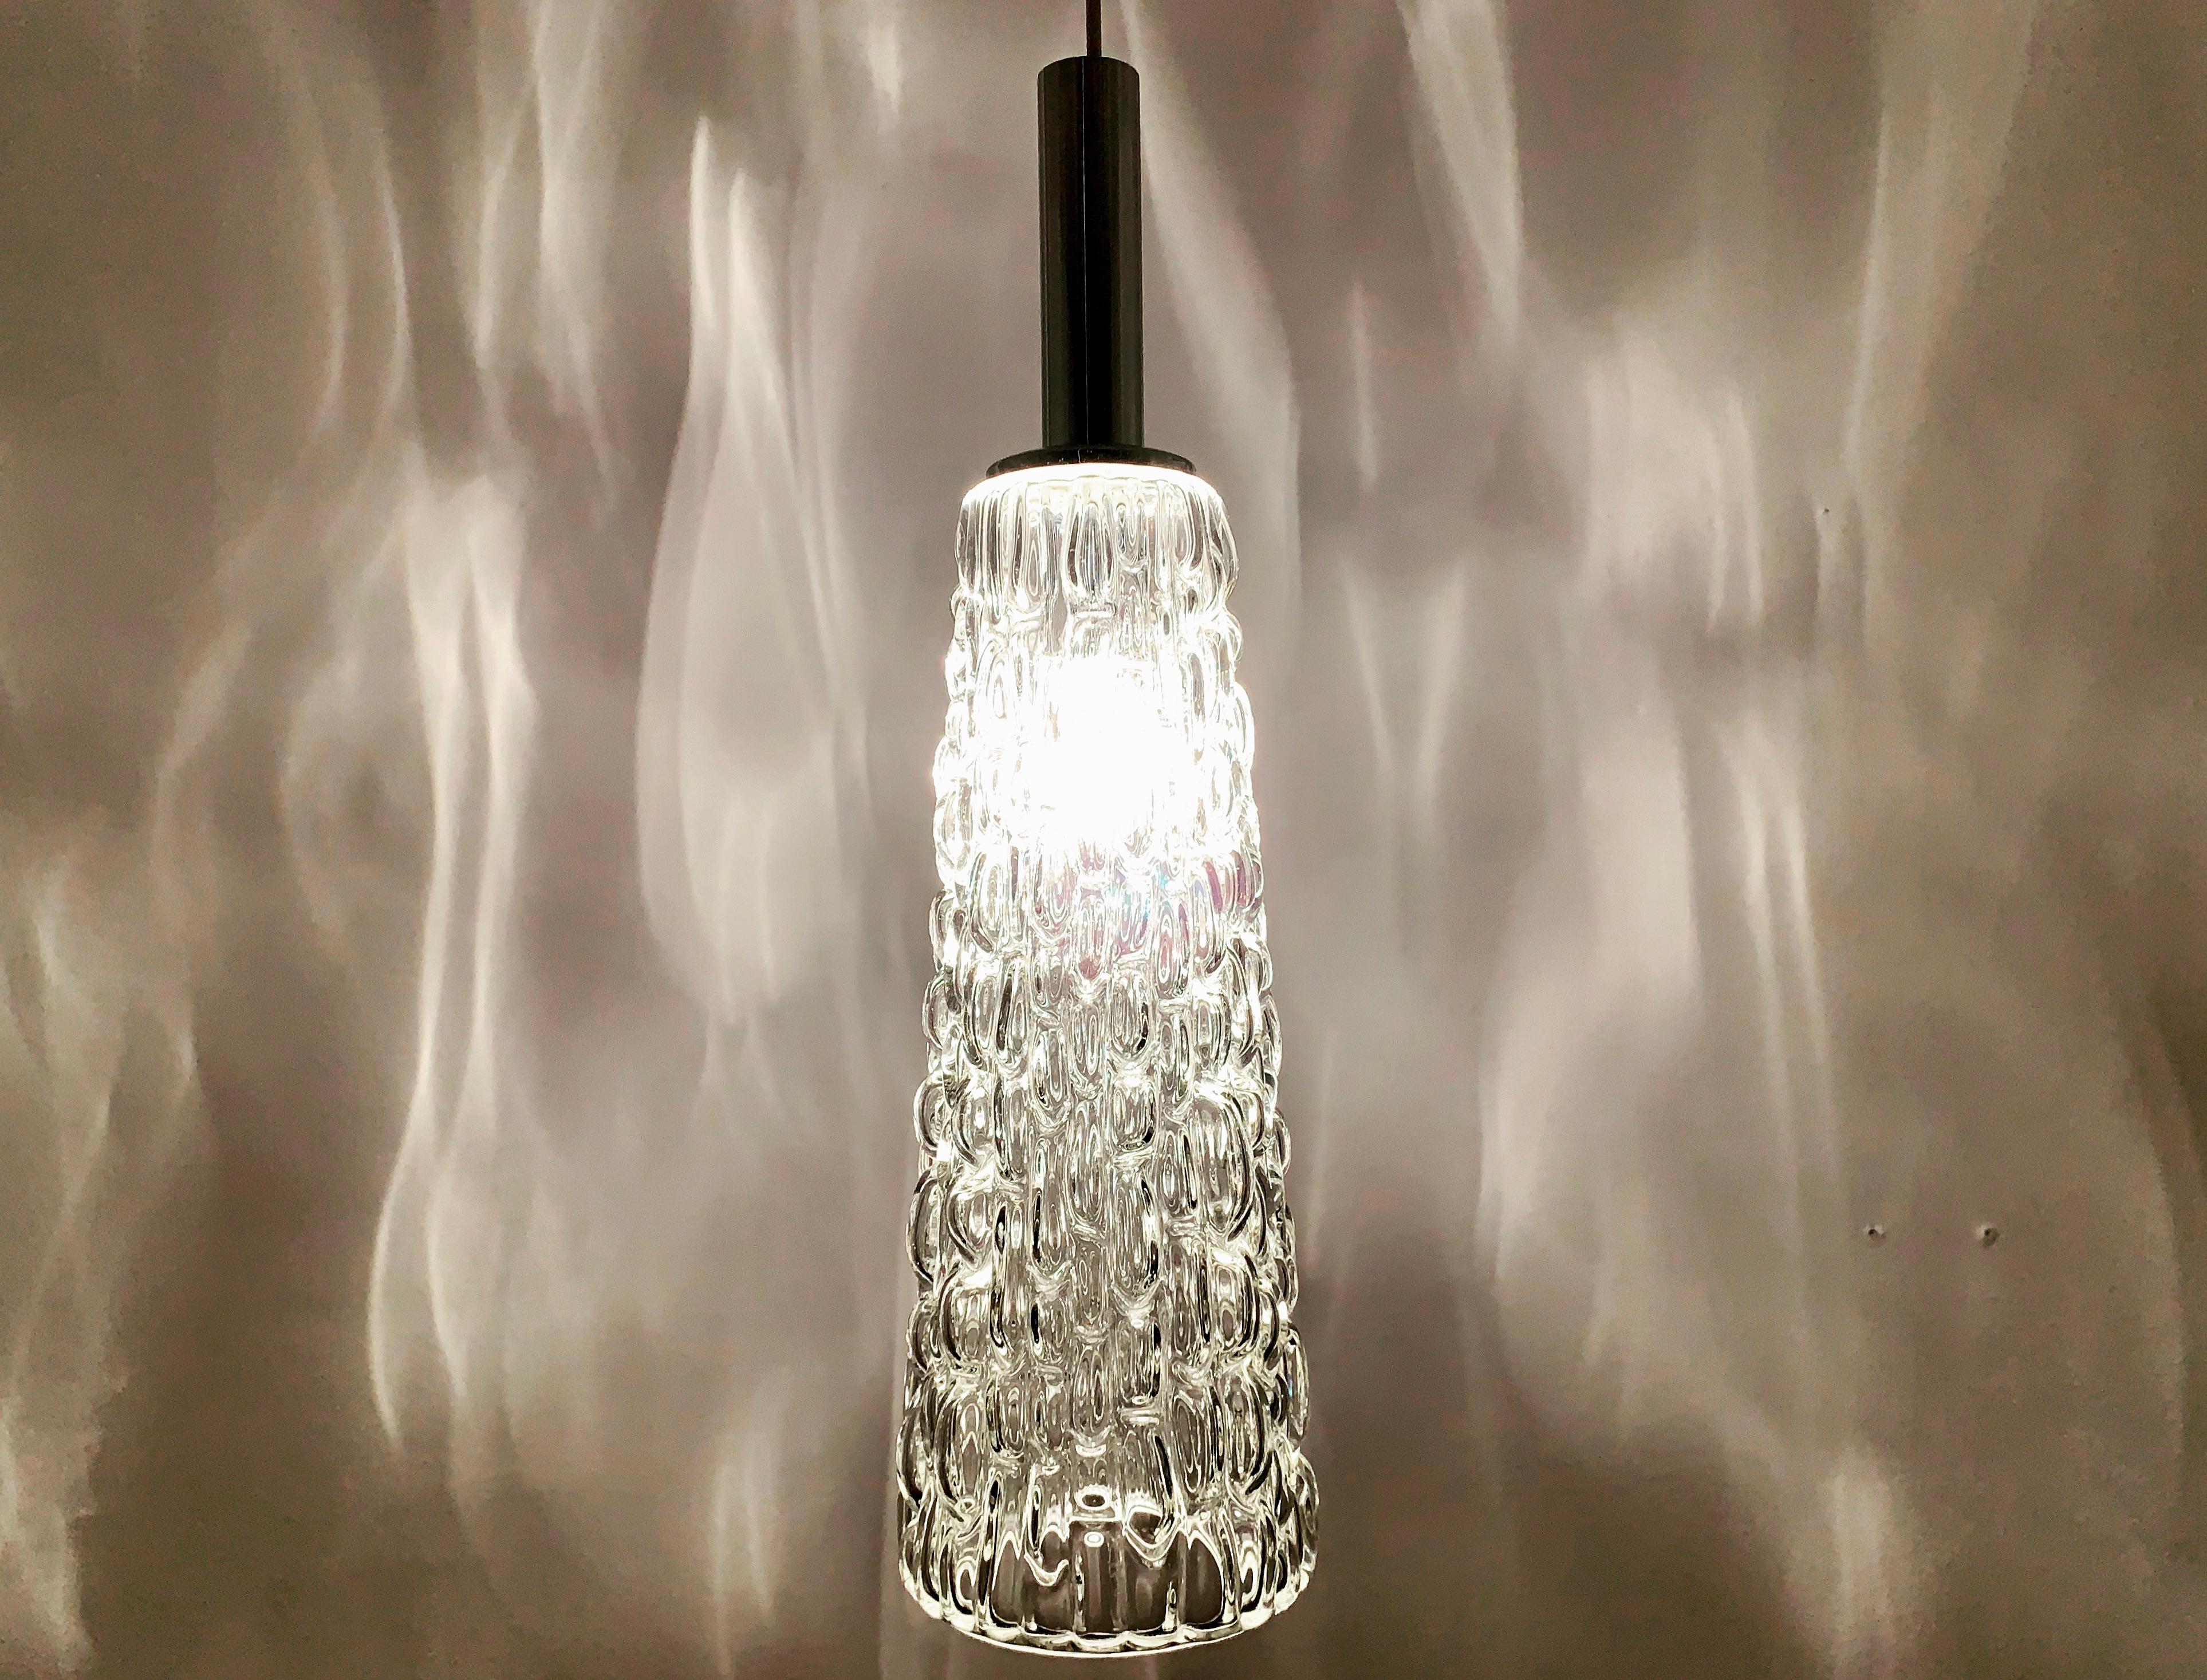 Set of 4 large crystal glass pendant lamps For Sale 5